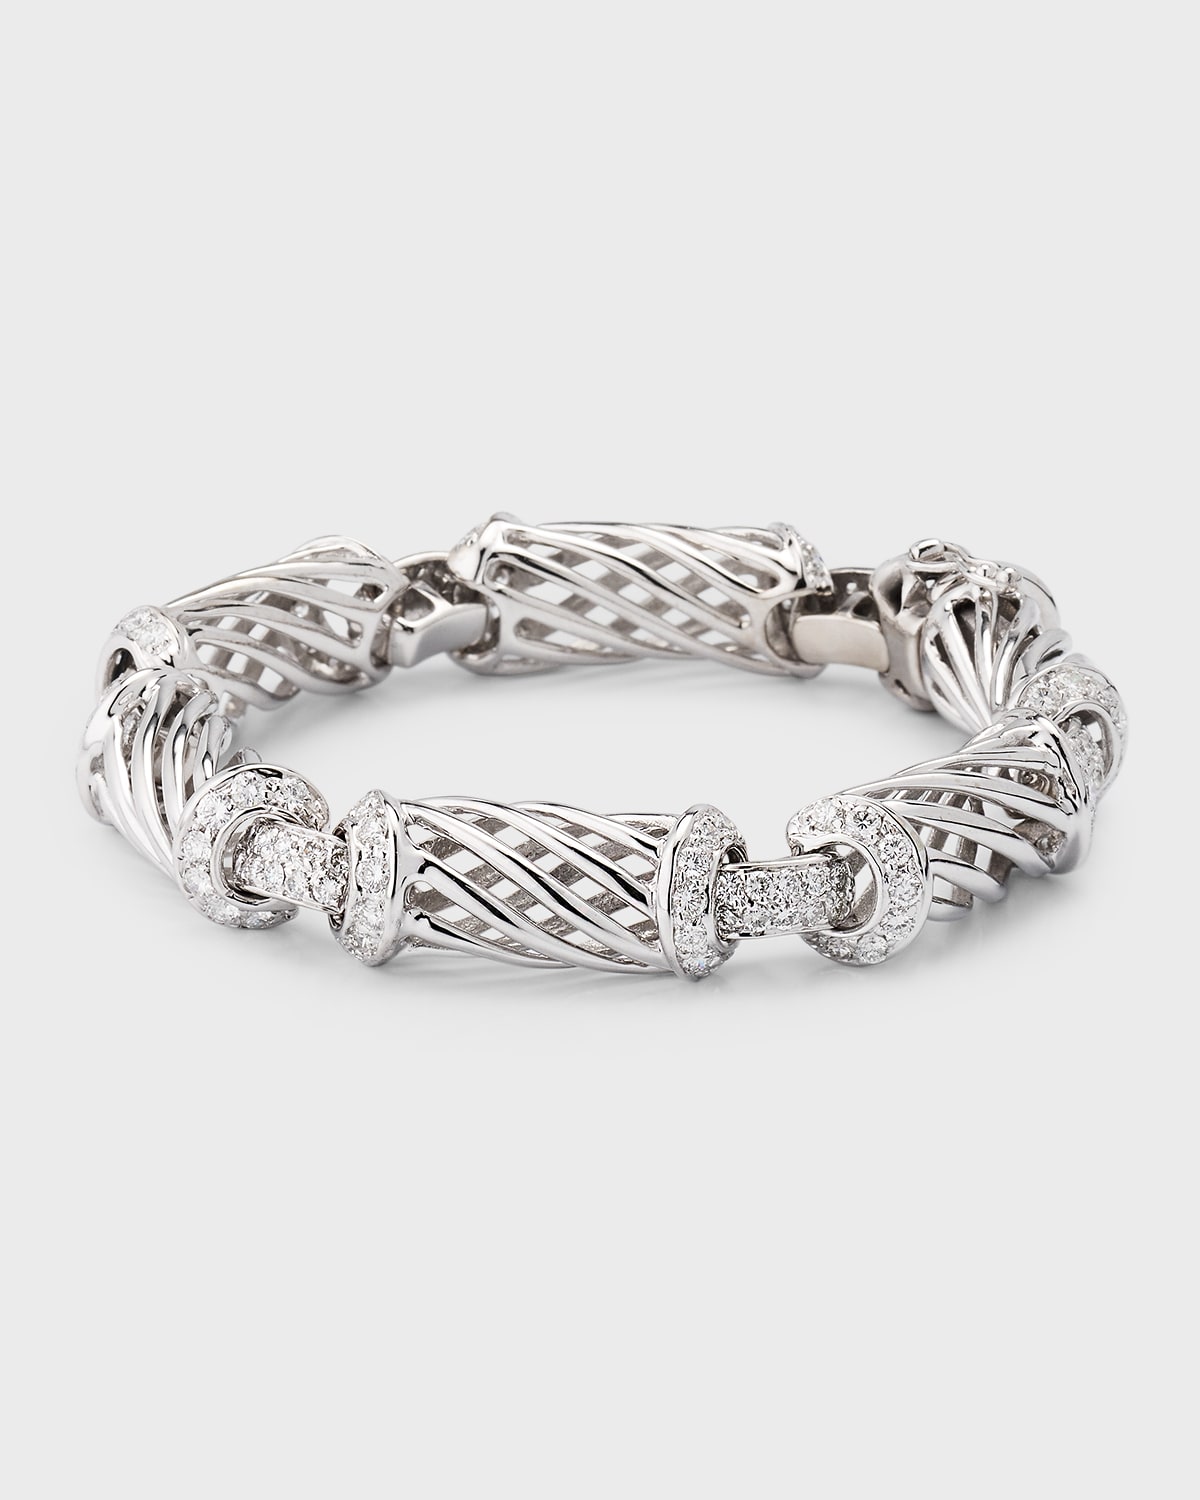 Nm Estate Estate 18k White Gold Open Swirl And Wire Grill Link Bracelet With 144 Diamonds